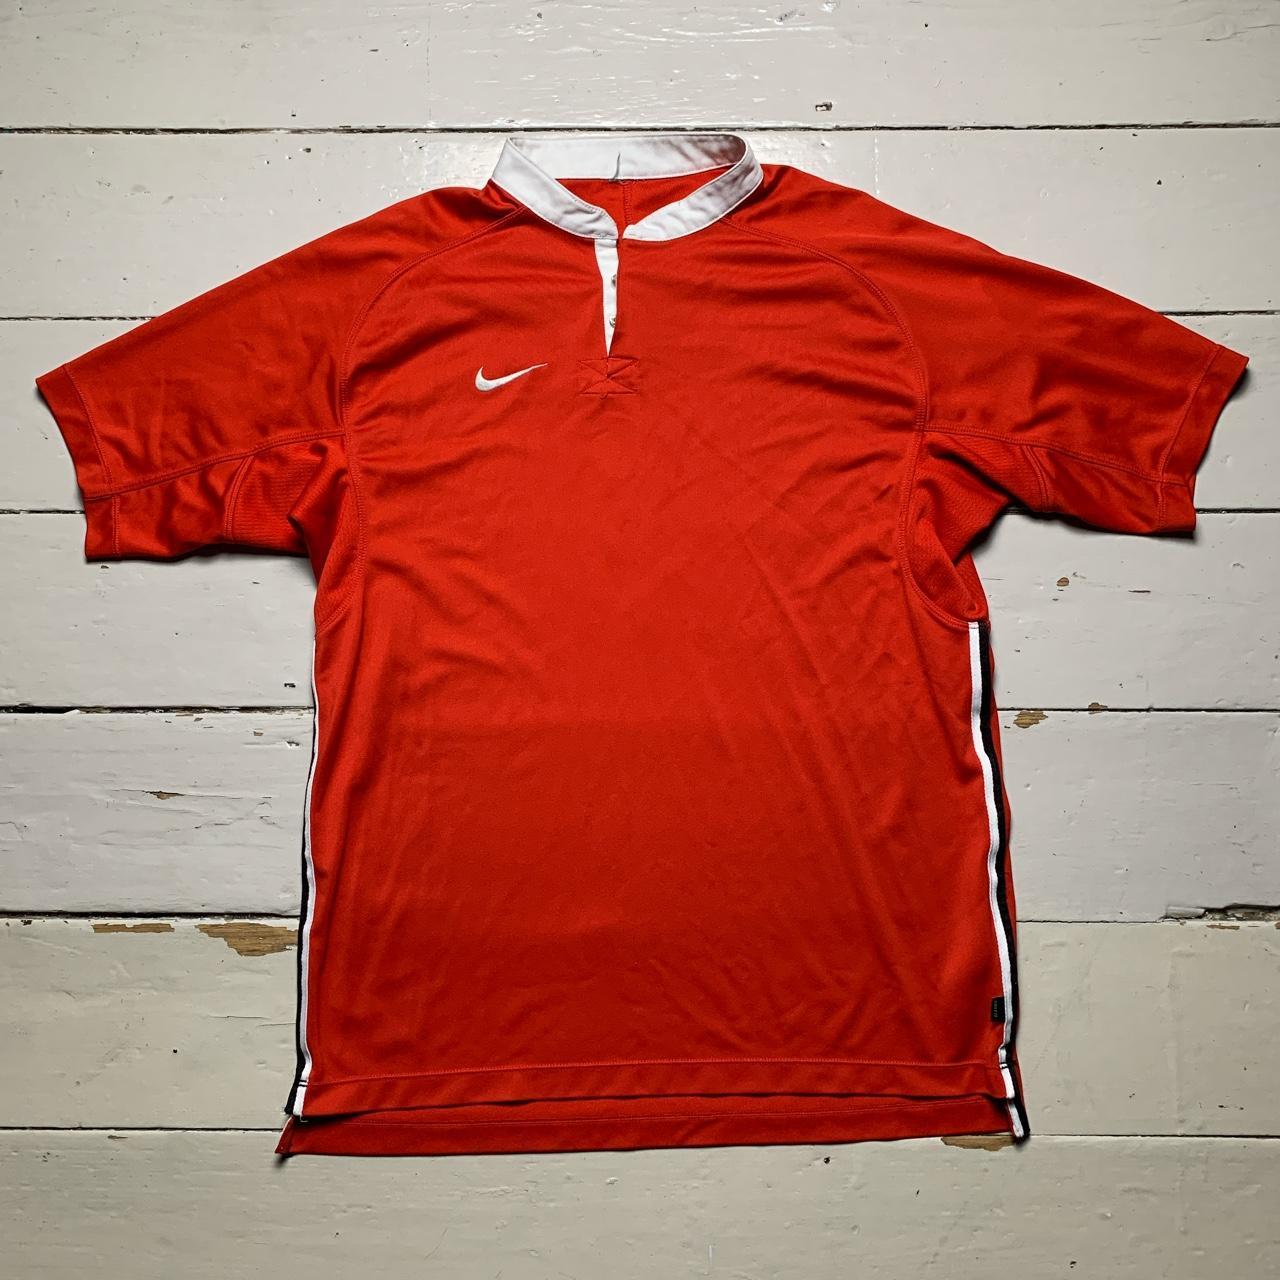 Nike Vintage Number 7 Polo Jersey Red and White